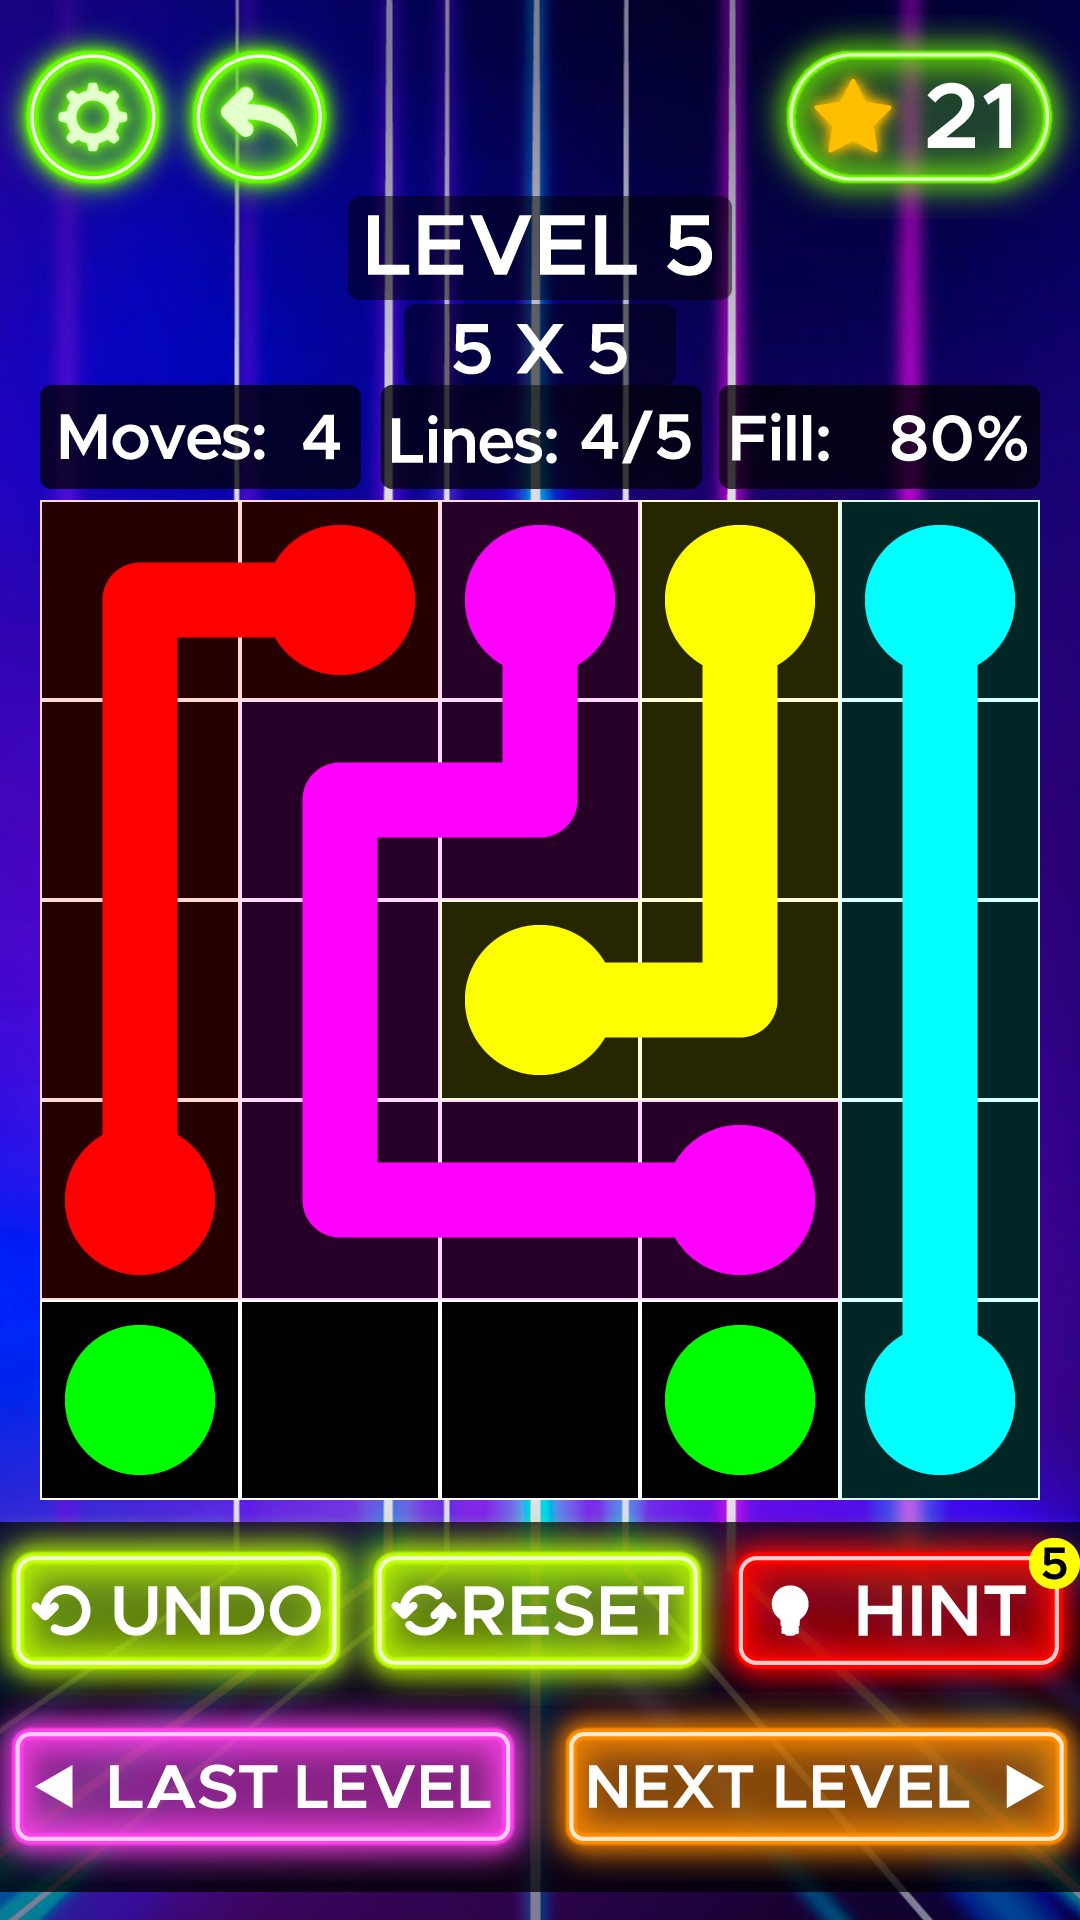 Dot Knot - Line & Color Puzzle - Apps on Google Play